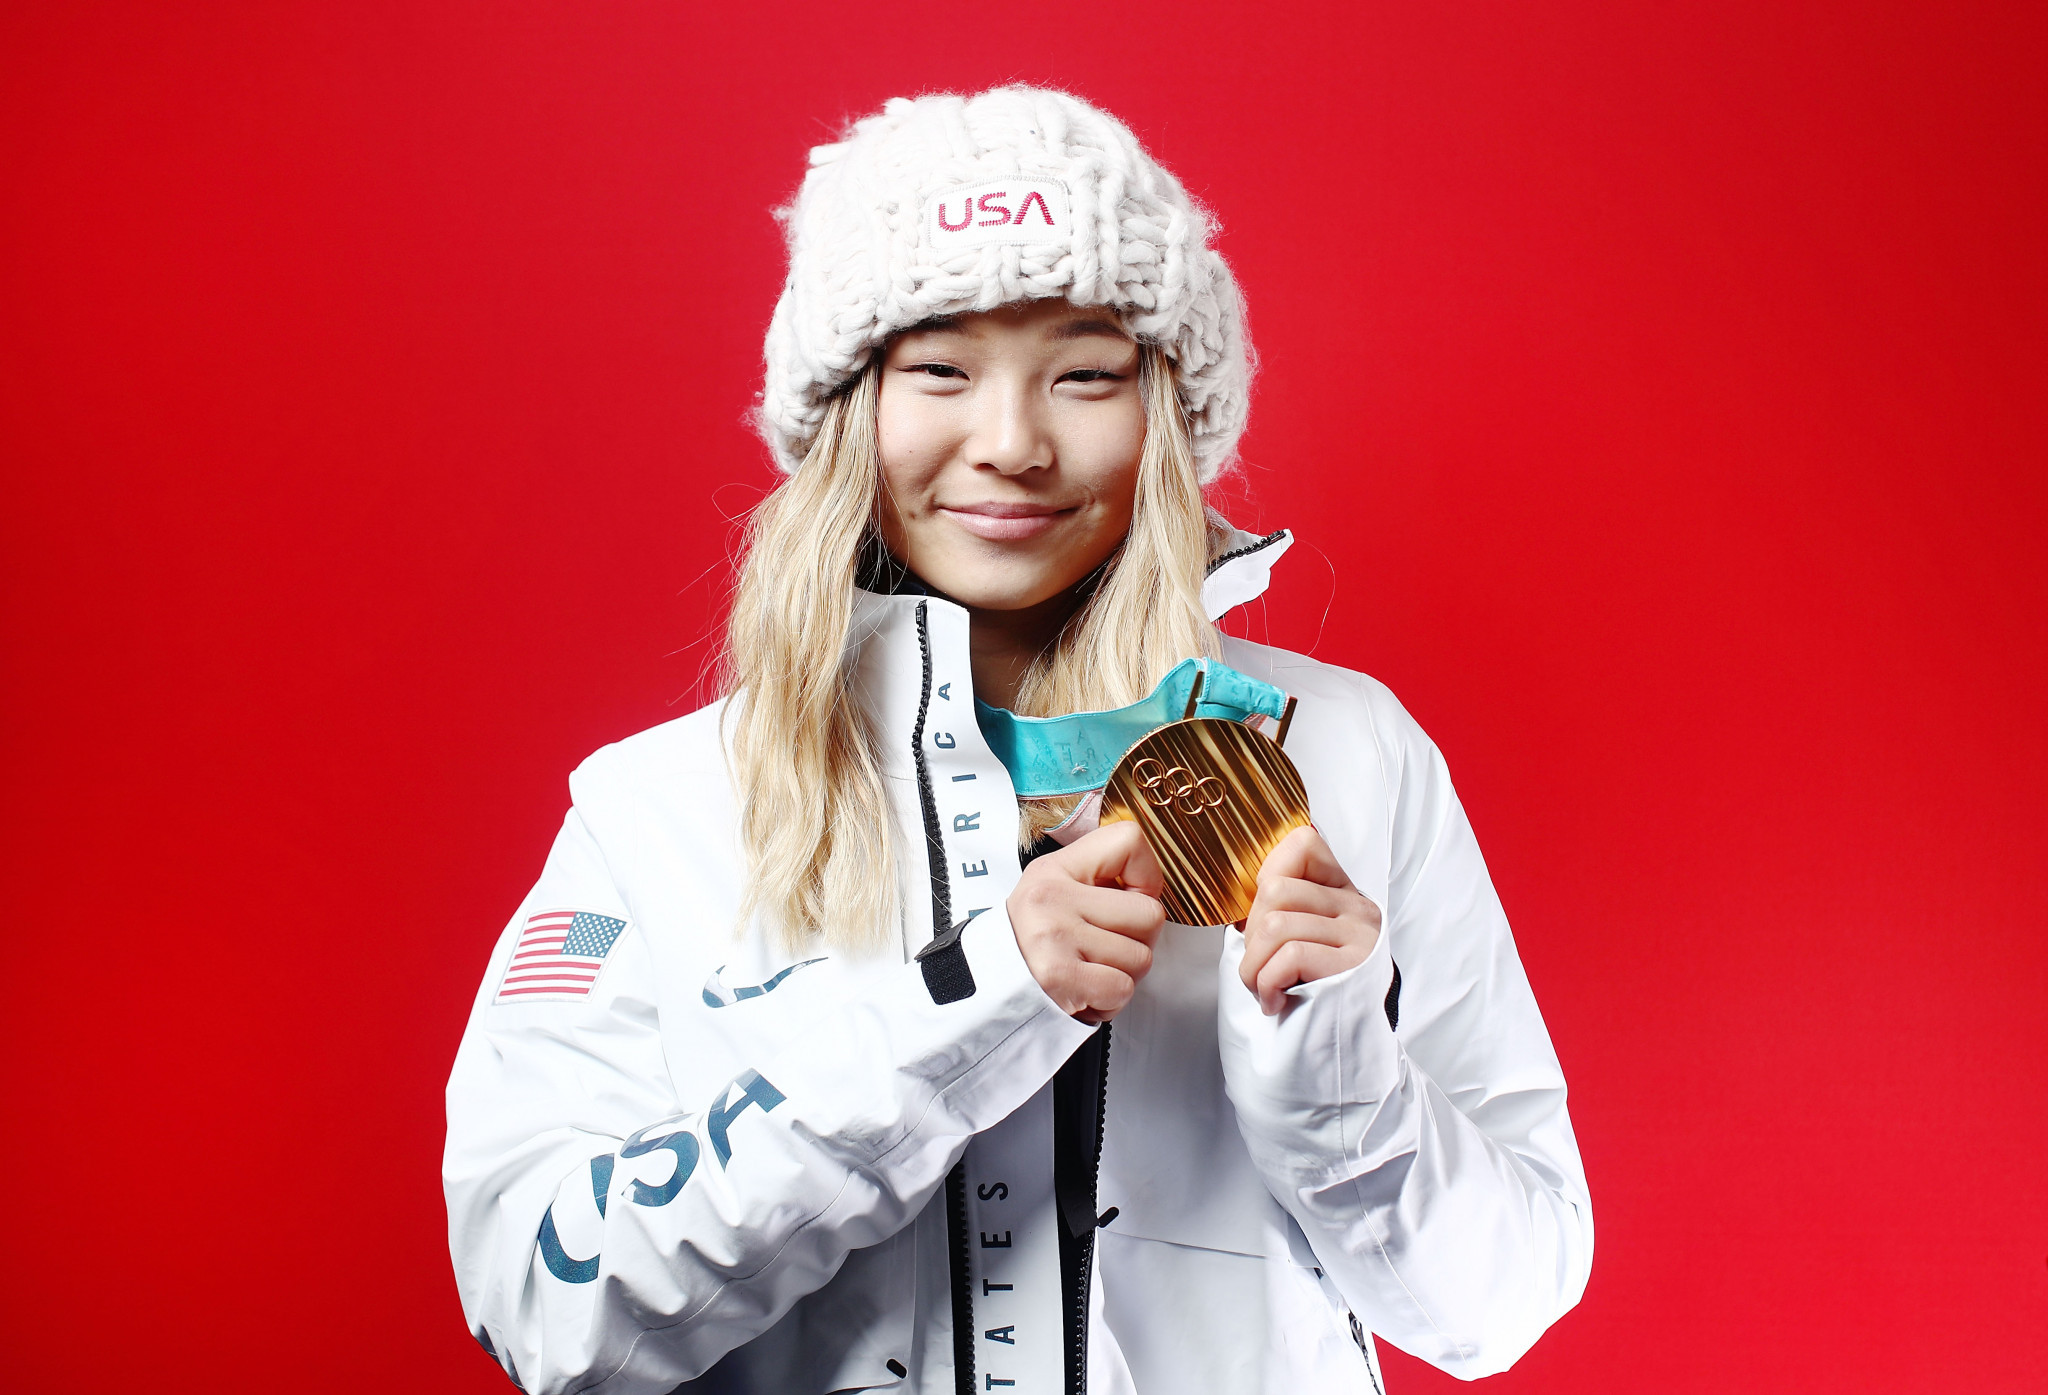 Snowboard halfpipe Olympic champion Chloe Kim has become the first woman to land a frontside double cork 1080 ©Getty Images